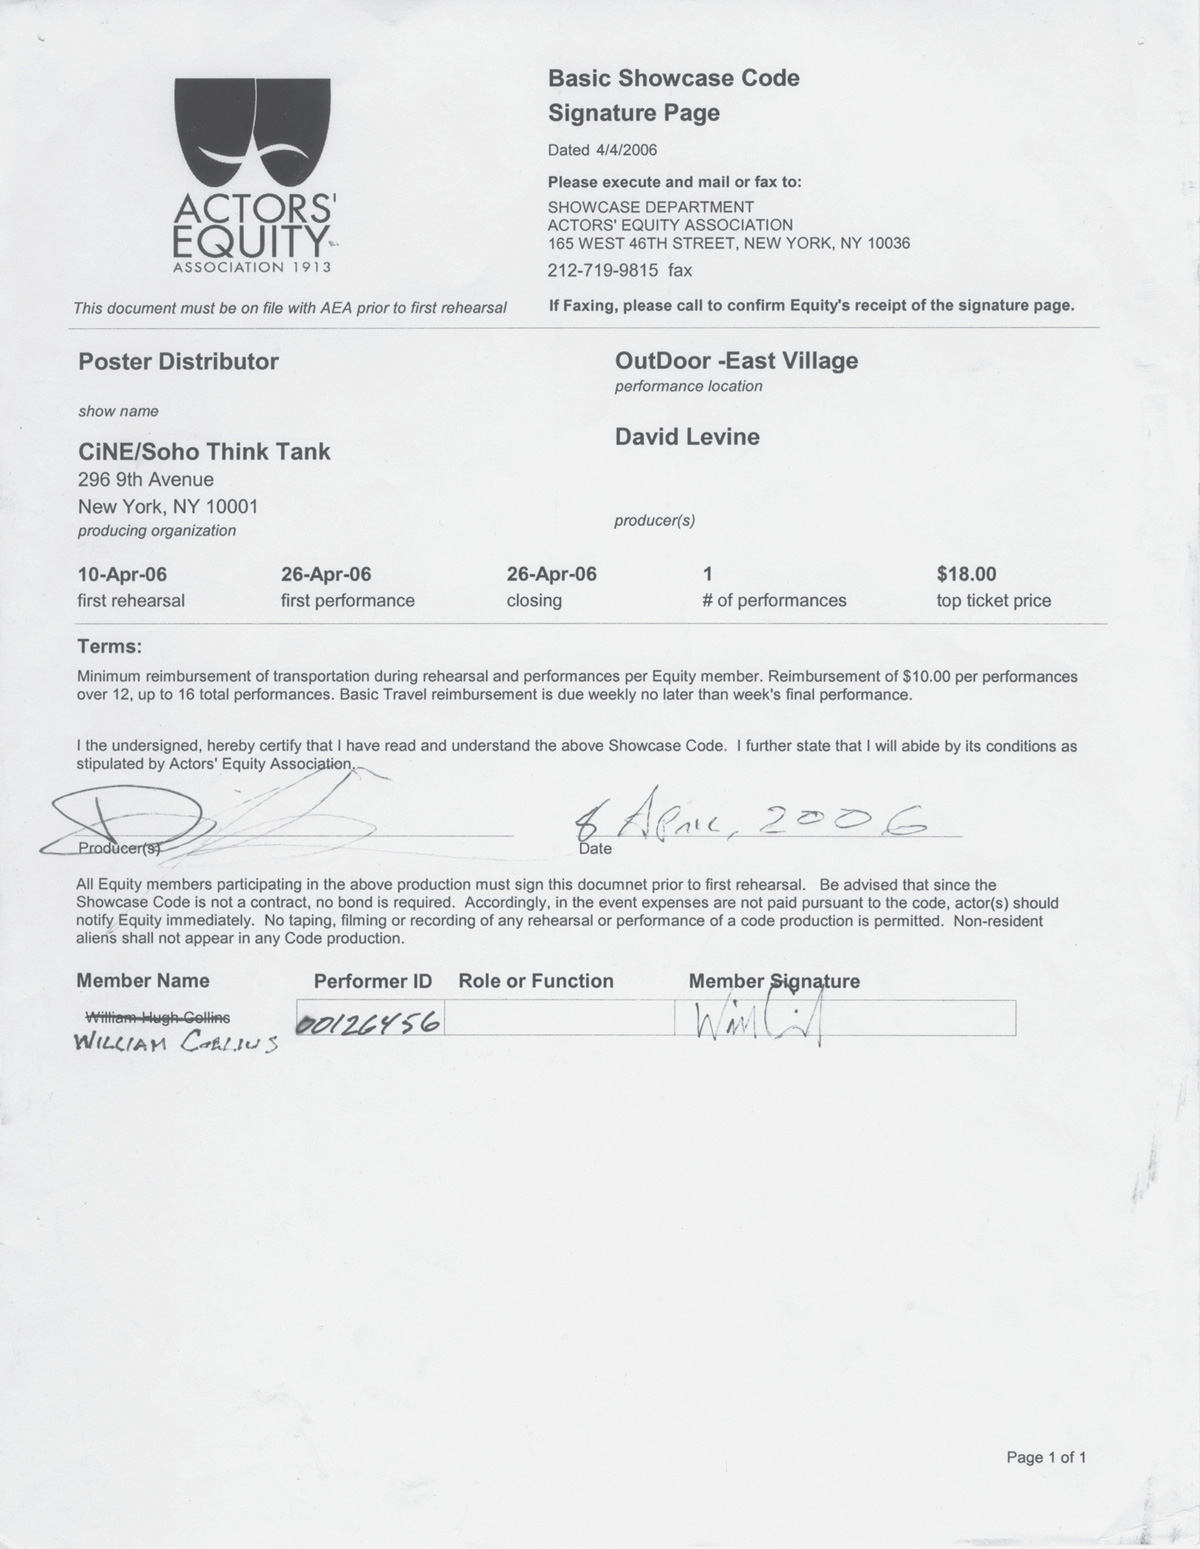 A contract between artist David Levine and actor William Coelius for him to act as a poster distributor.